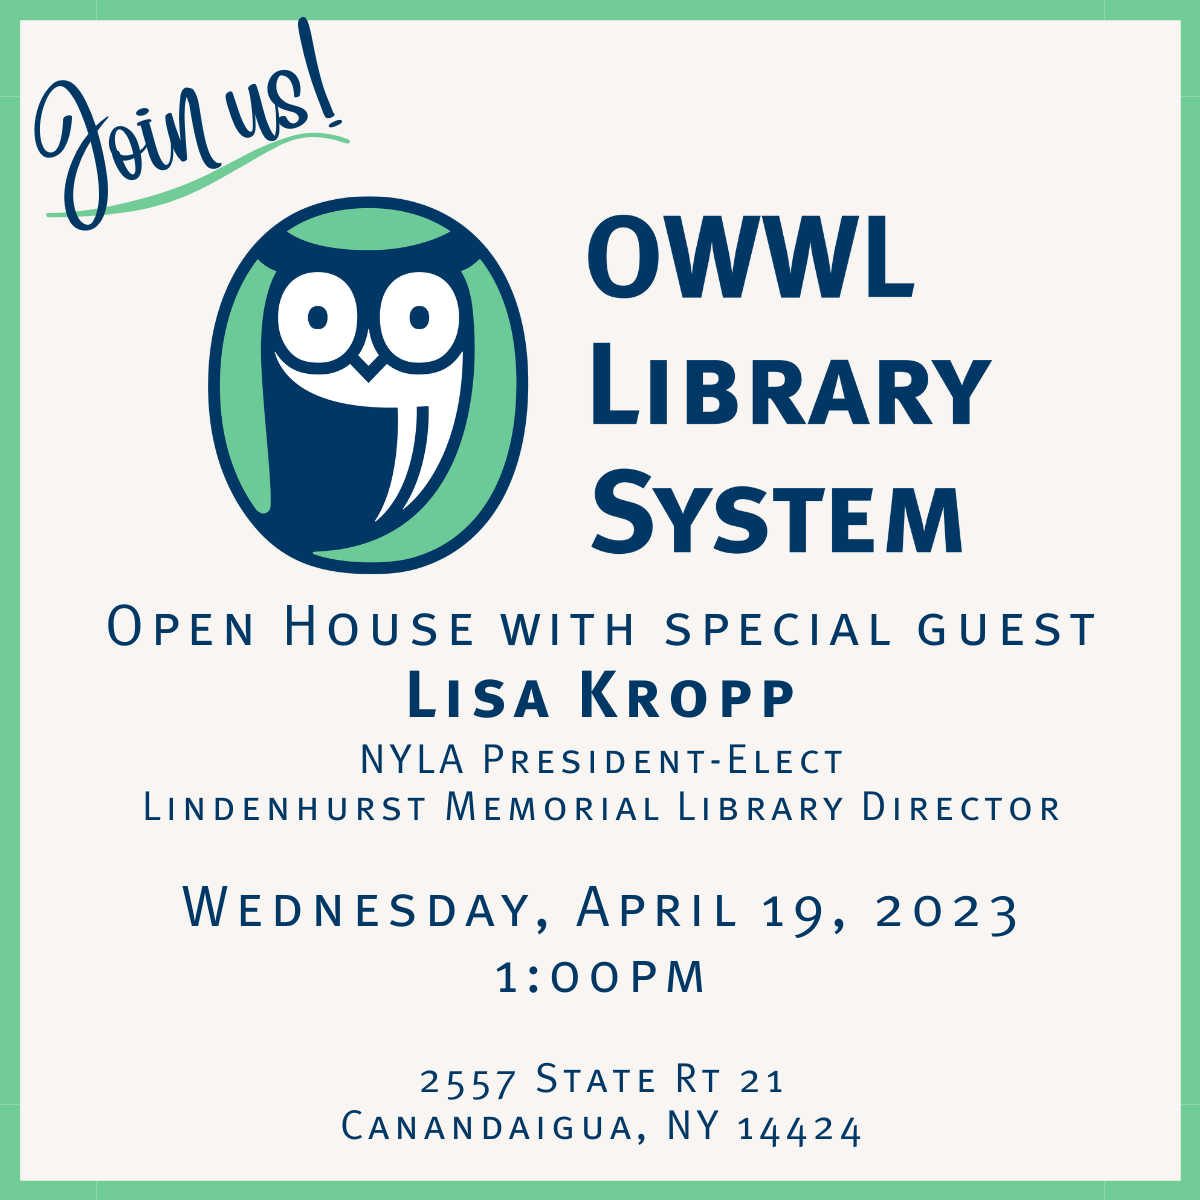 OWWL Library System Open House